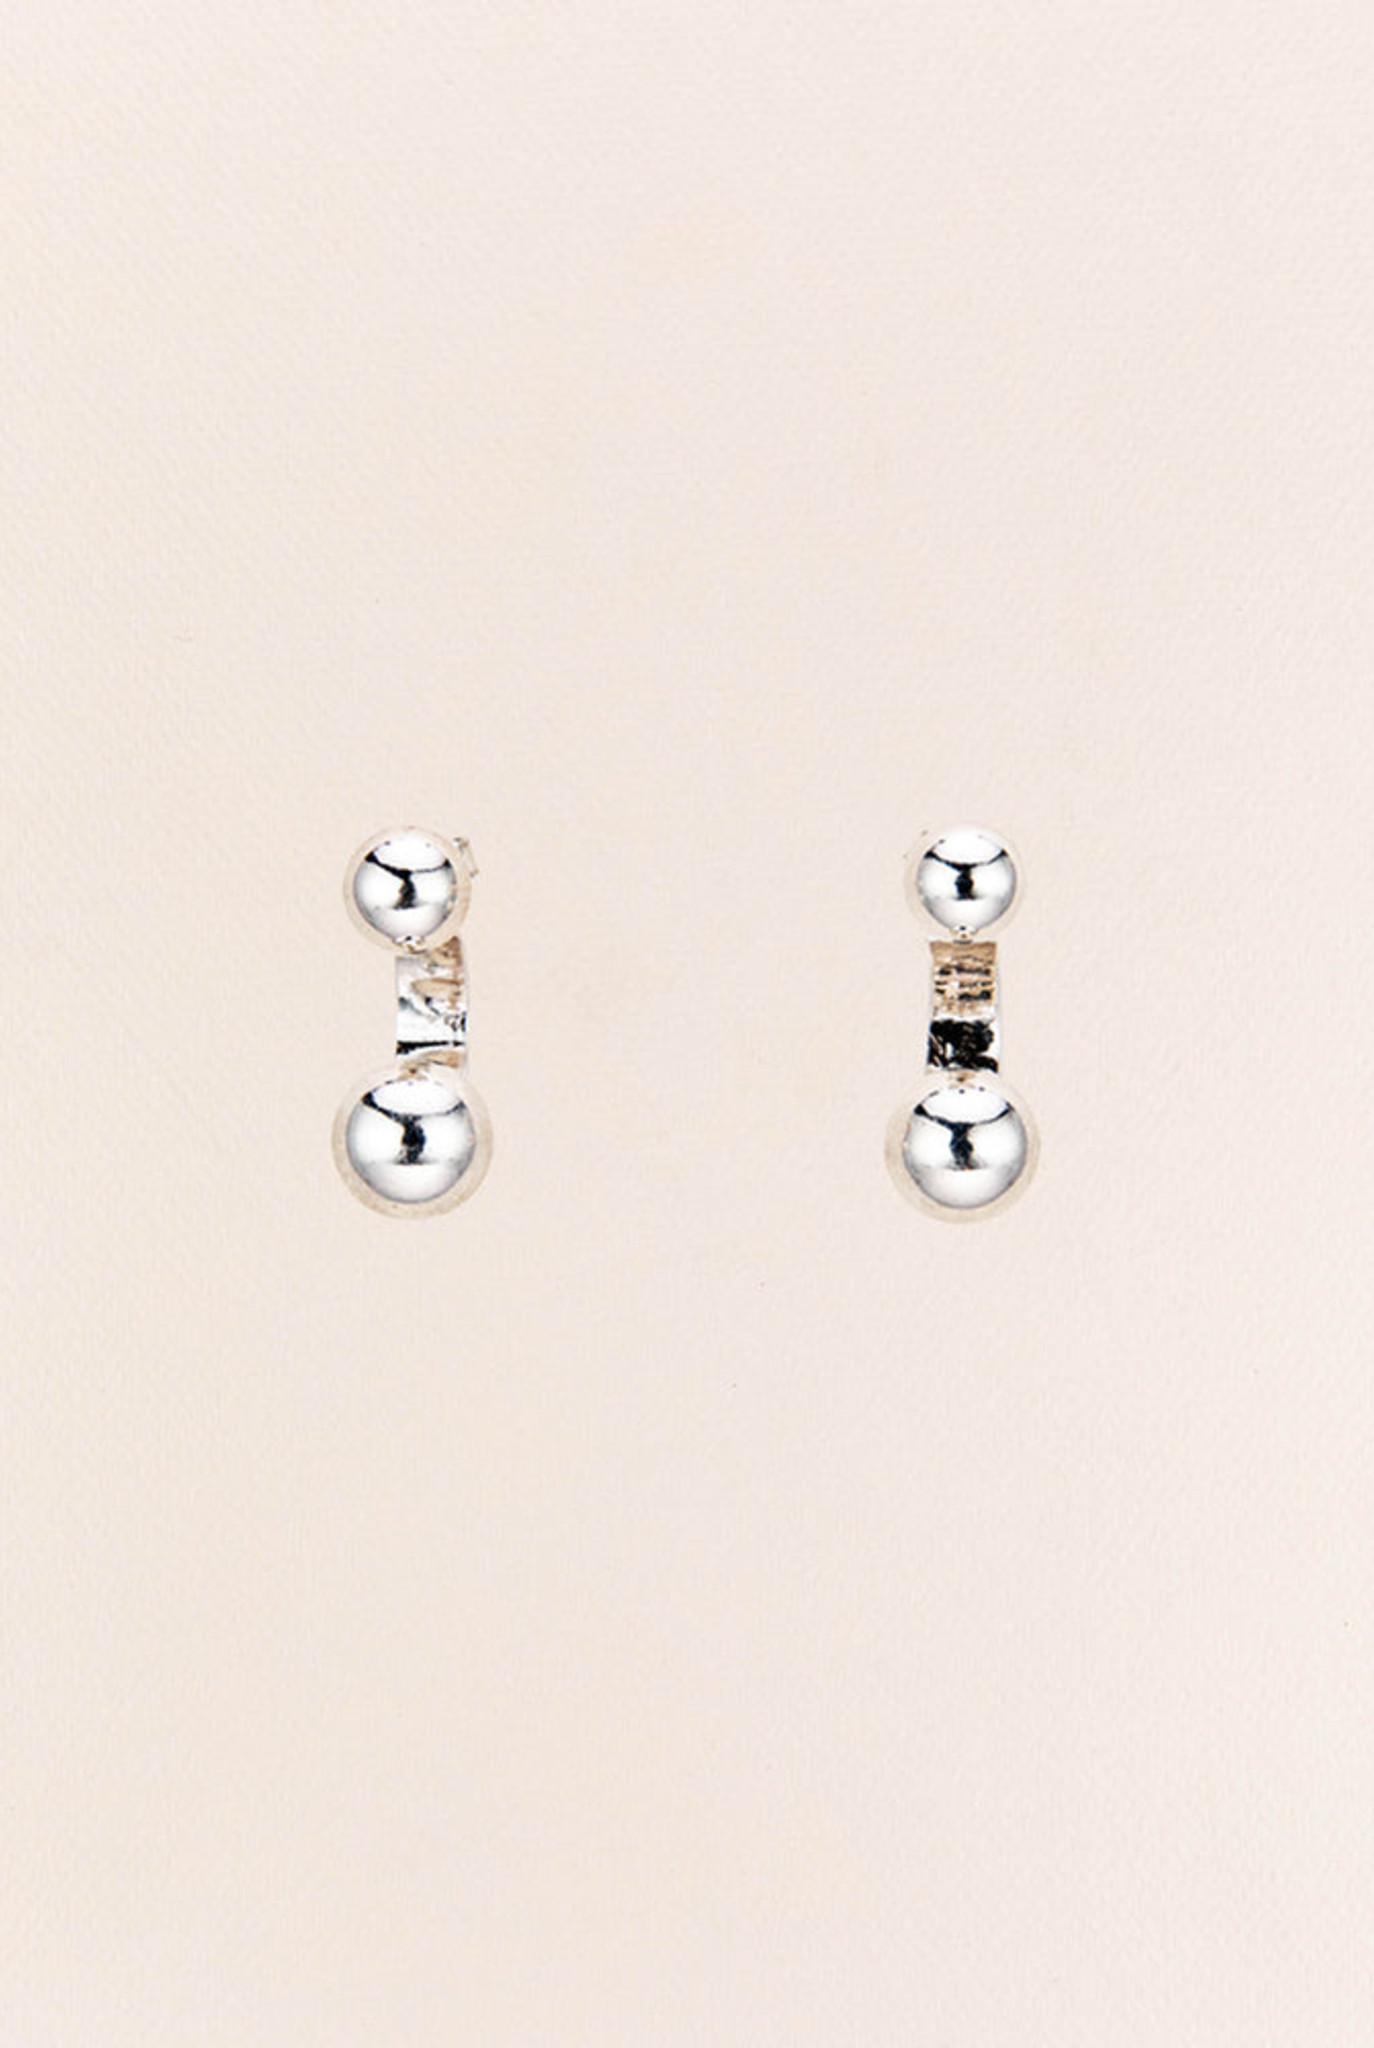 Stud earrings with floating balls